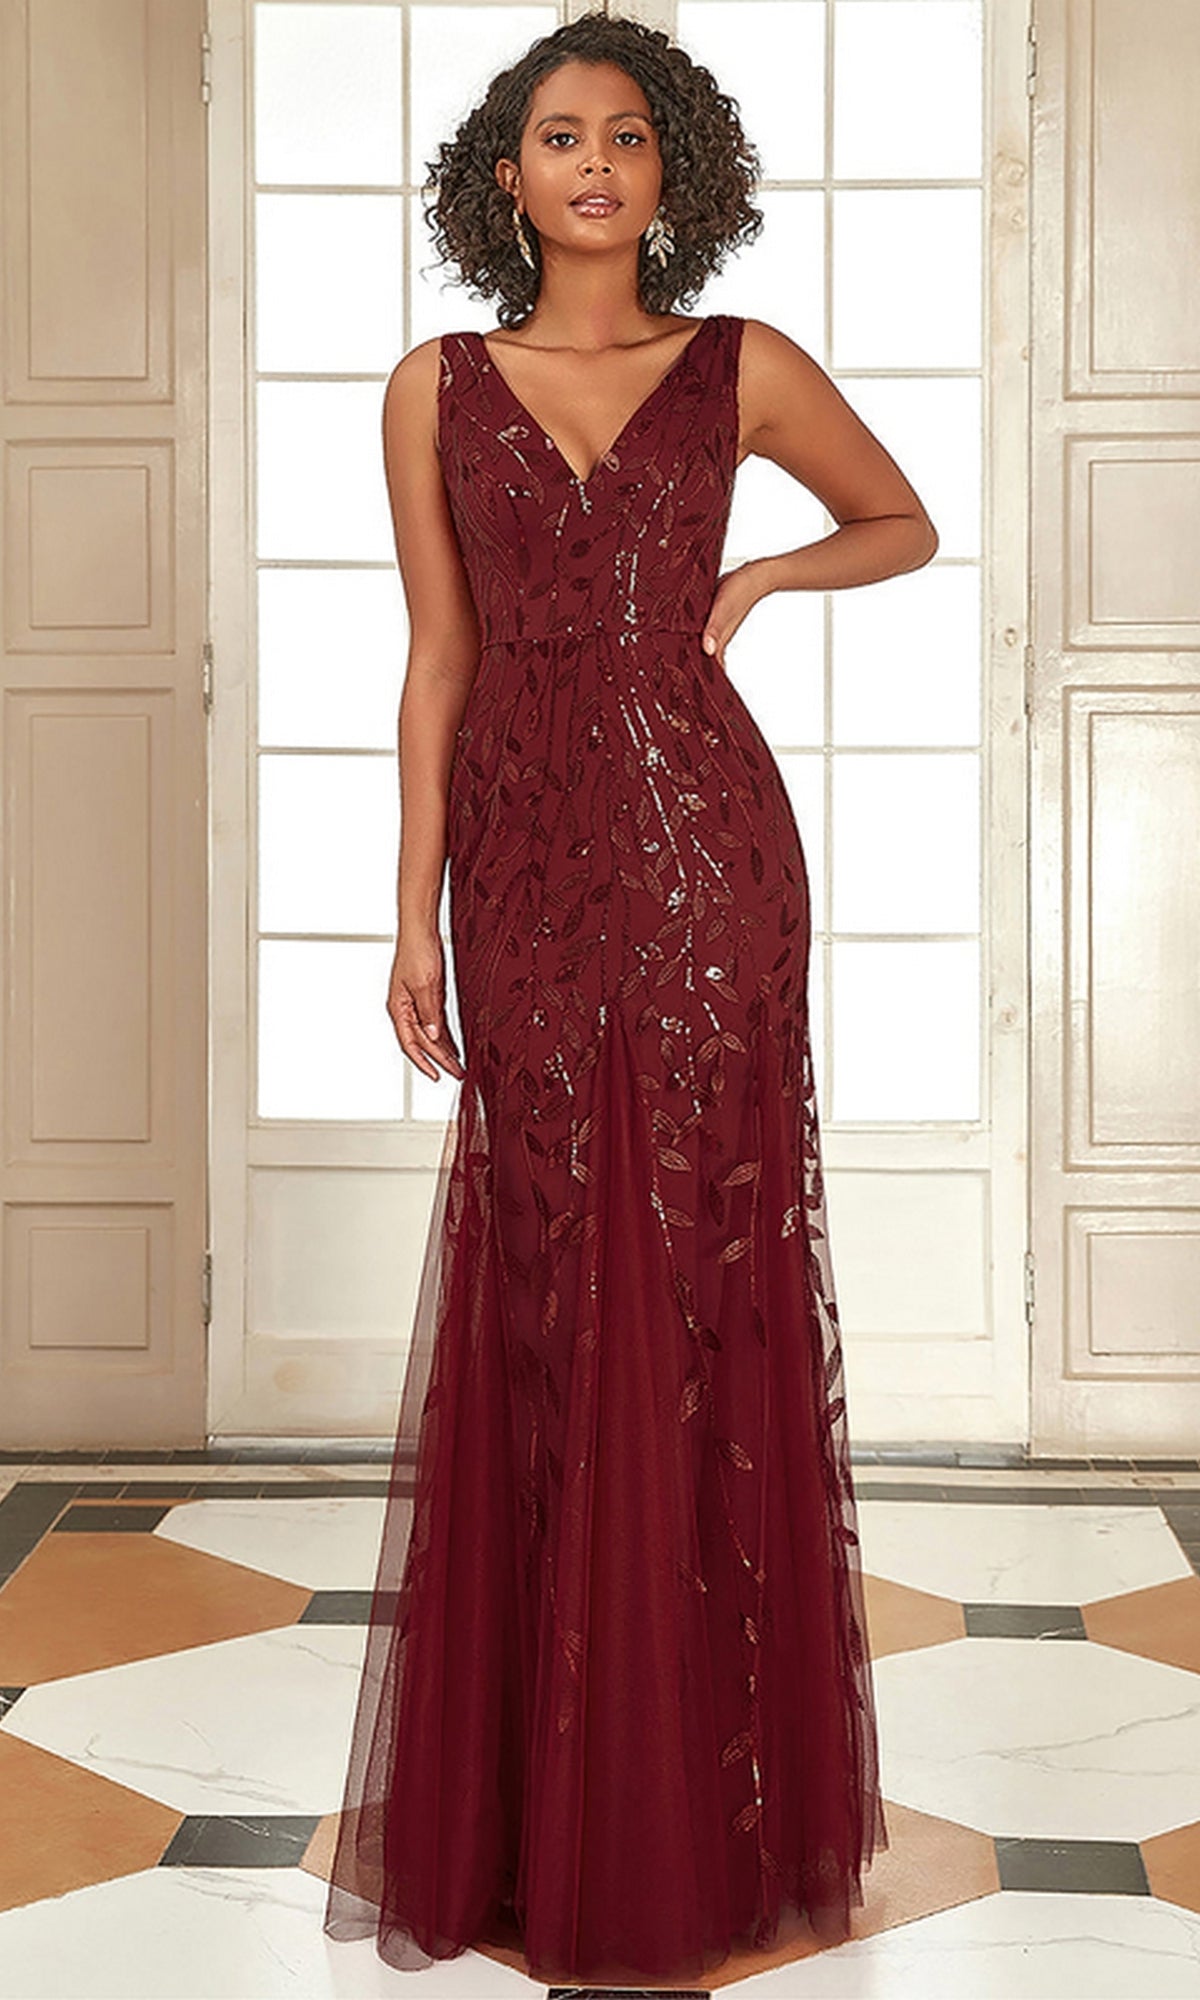 Ball Gown - Shop Evening Gowns Online, 49 Dress Styles at Princessly